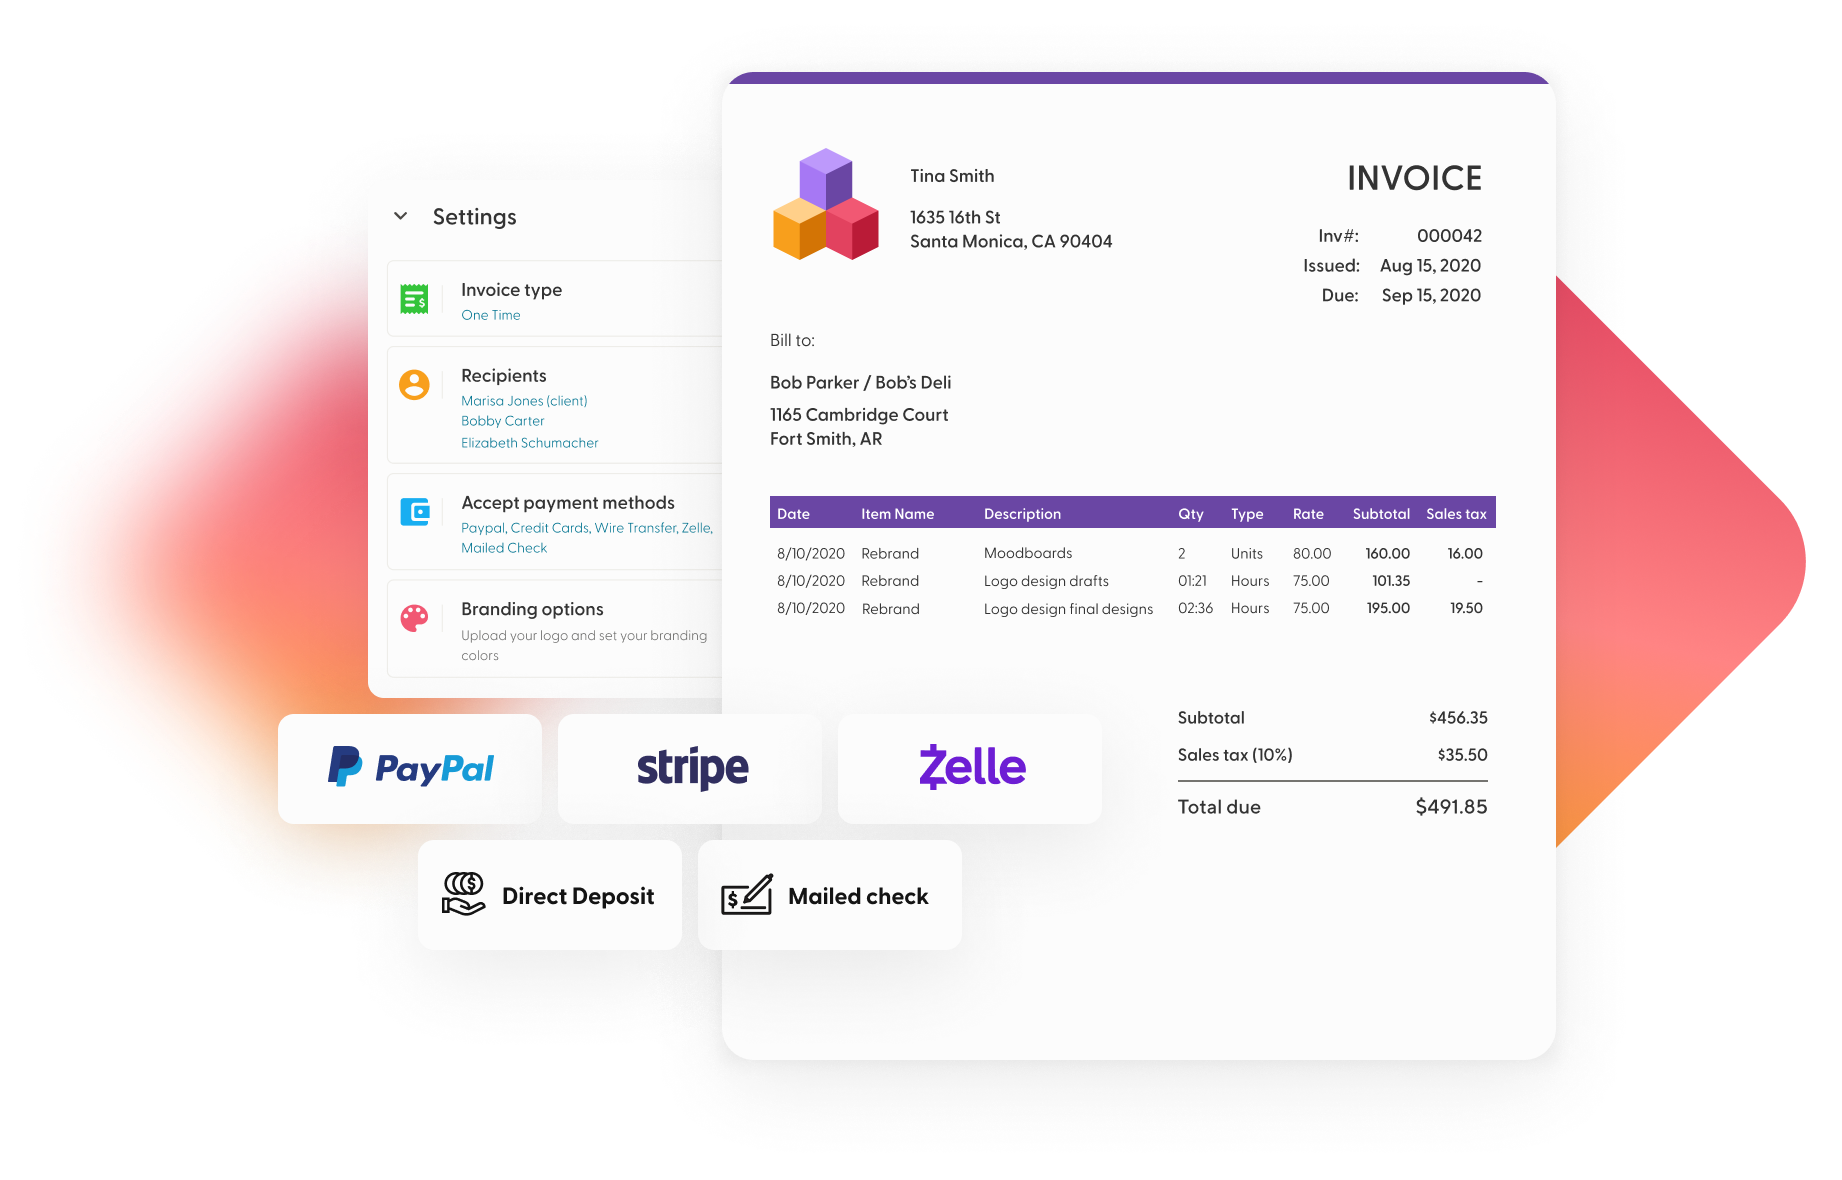 Invoices: easily generate and send invoices – get paid faster than ever.